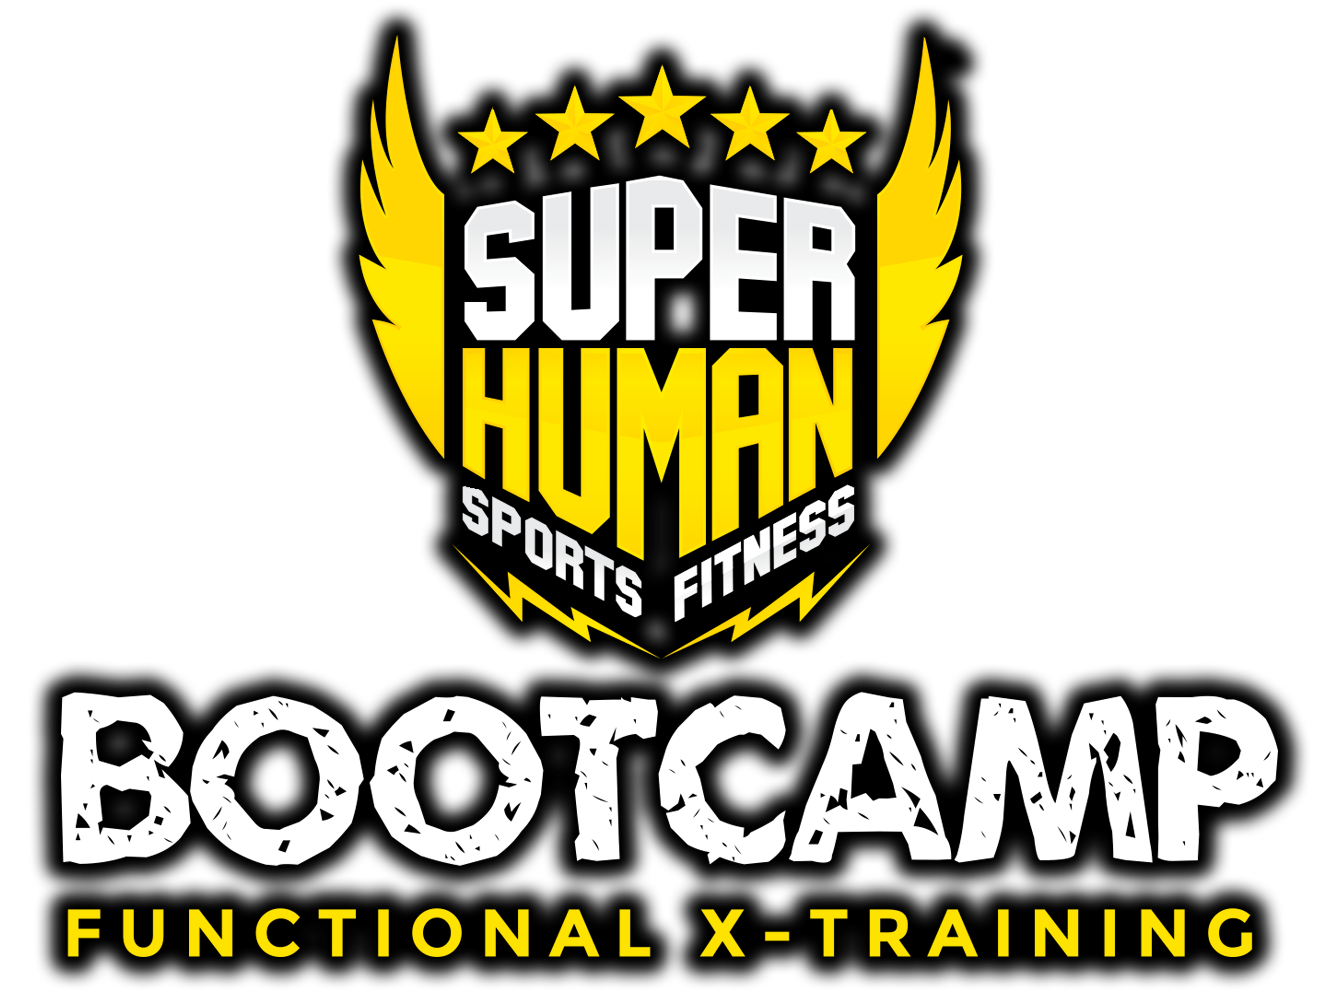 Bootcamp - FXT!